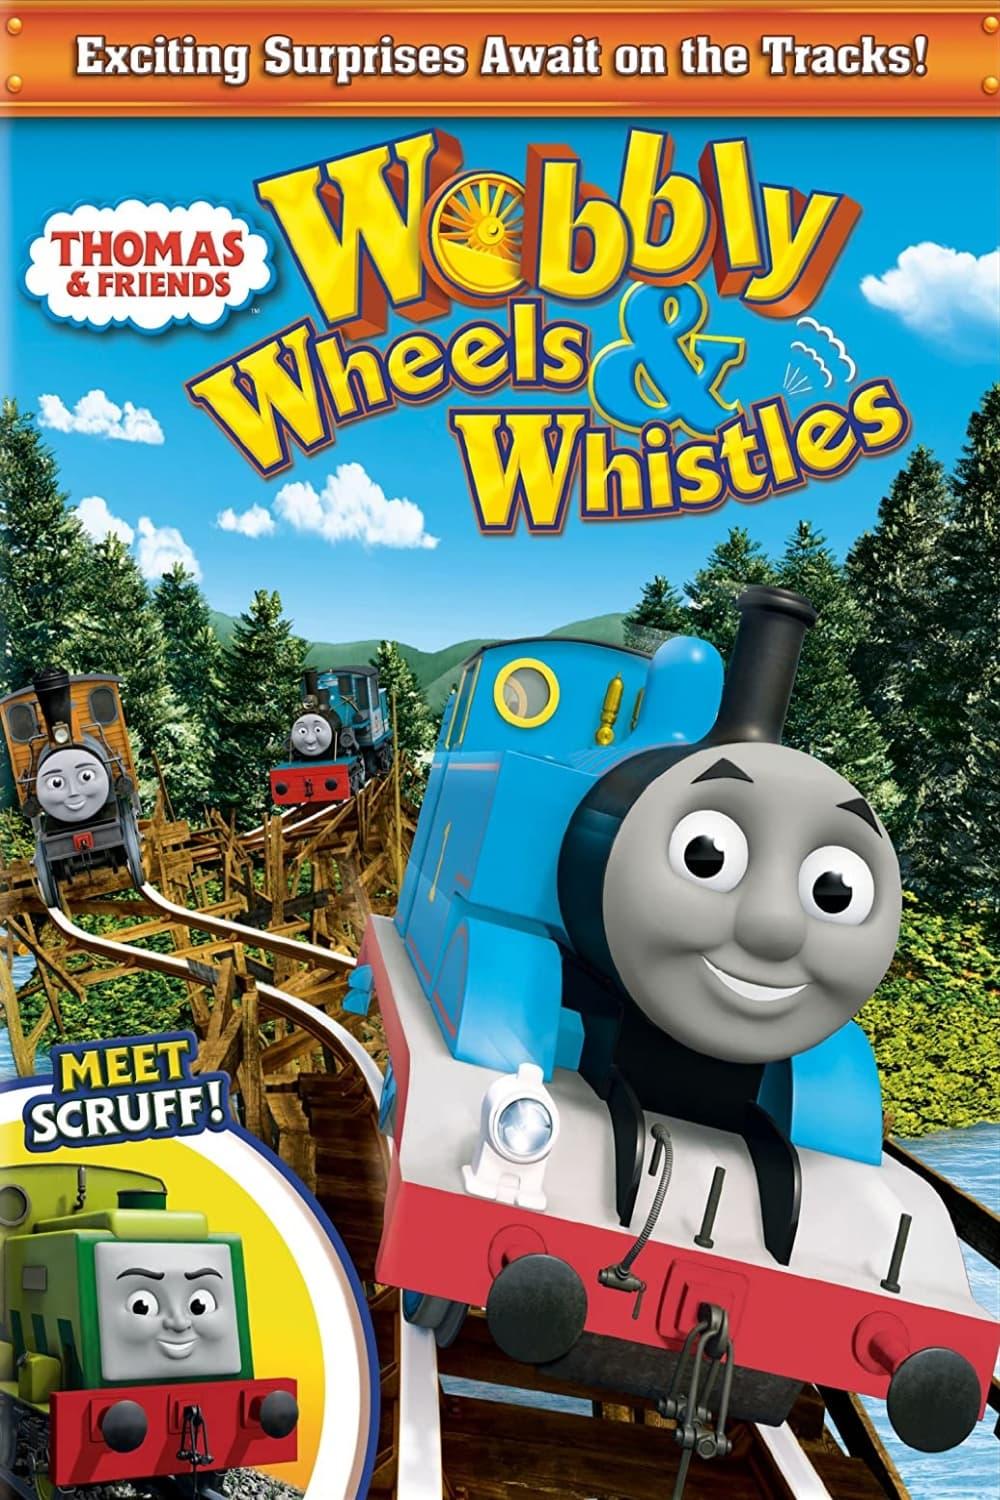 Thomas & Friends: Wobbly Wheels & Whistles poster